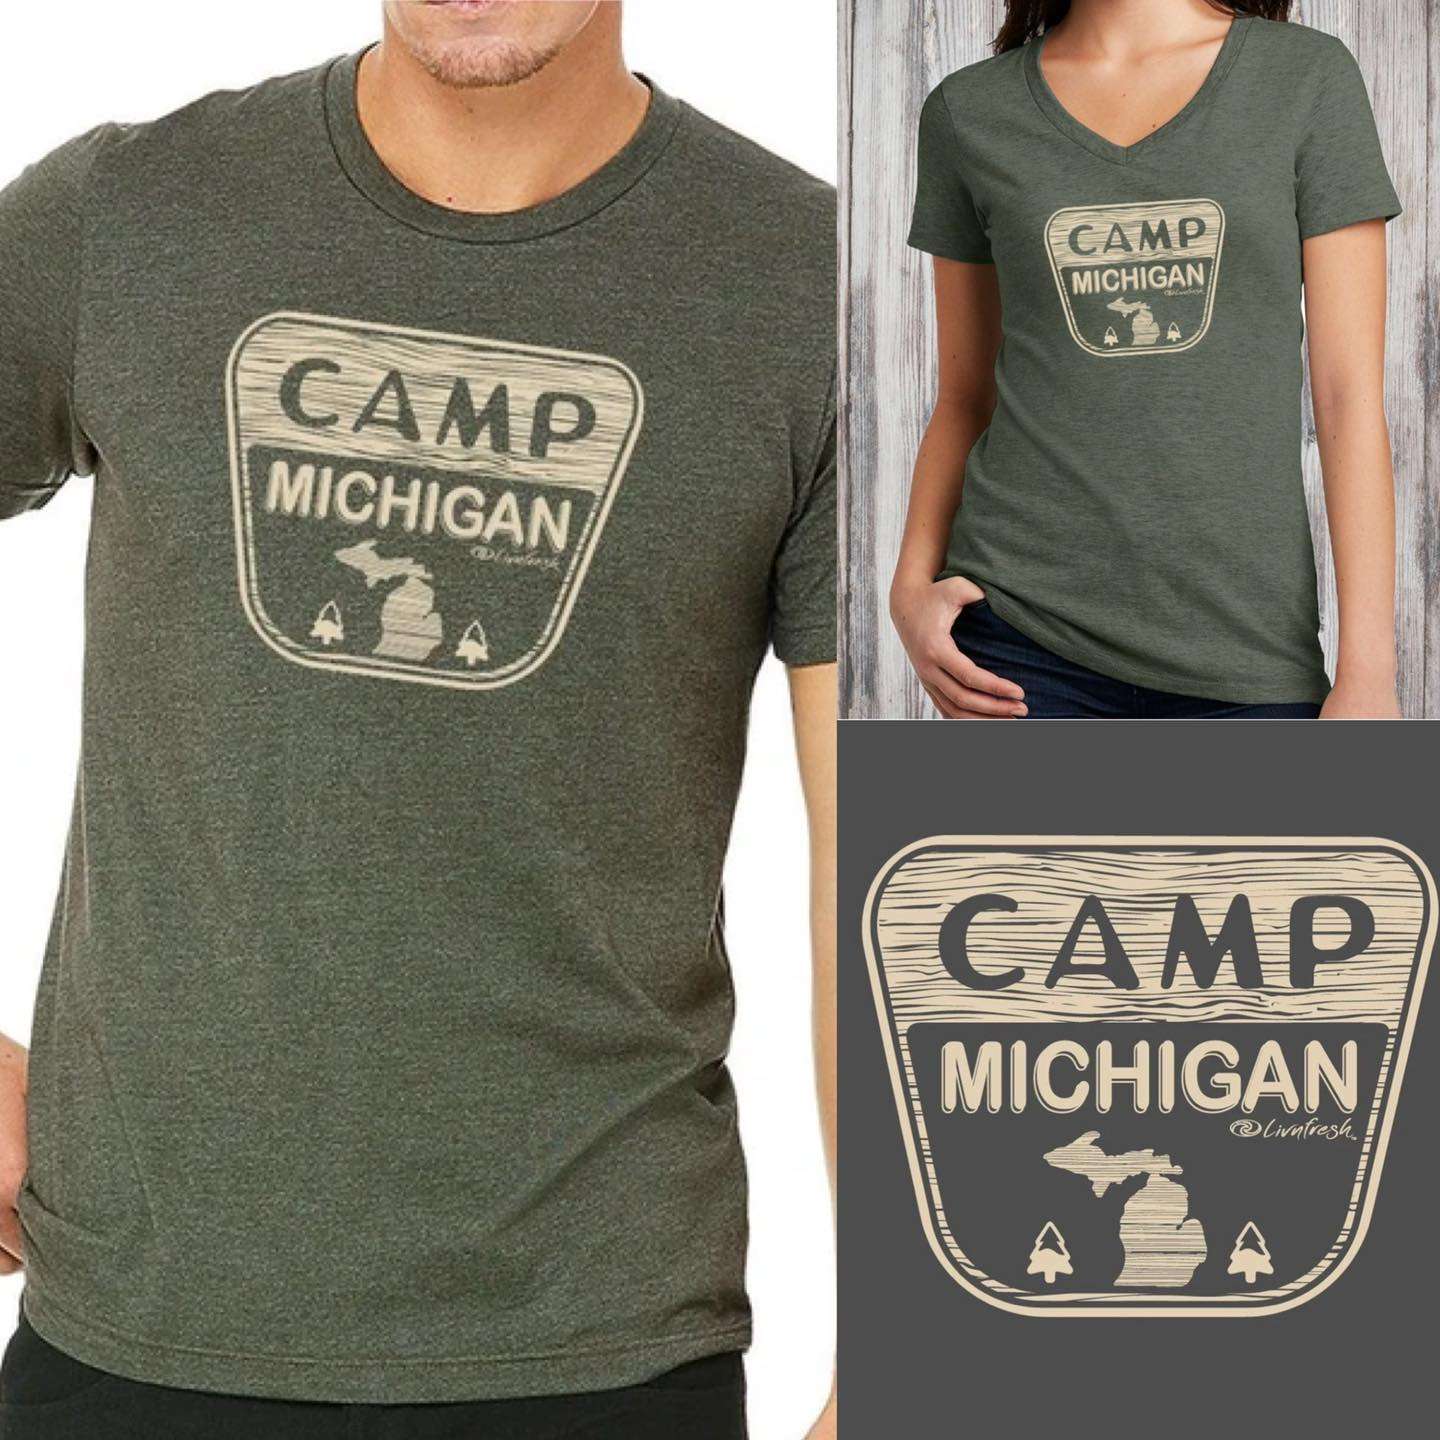 Camp Michigan - Michigan US State, T-shirt for camping lover